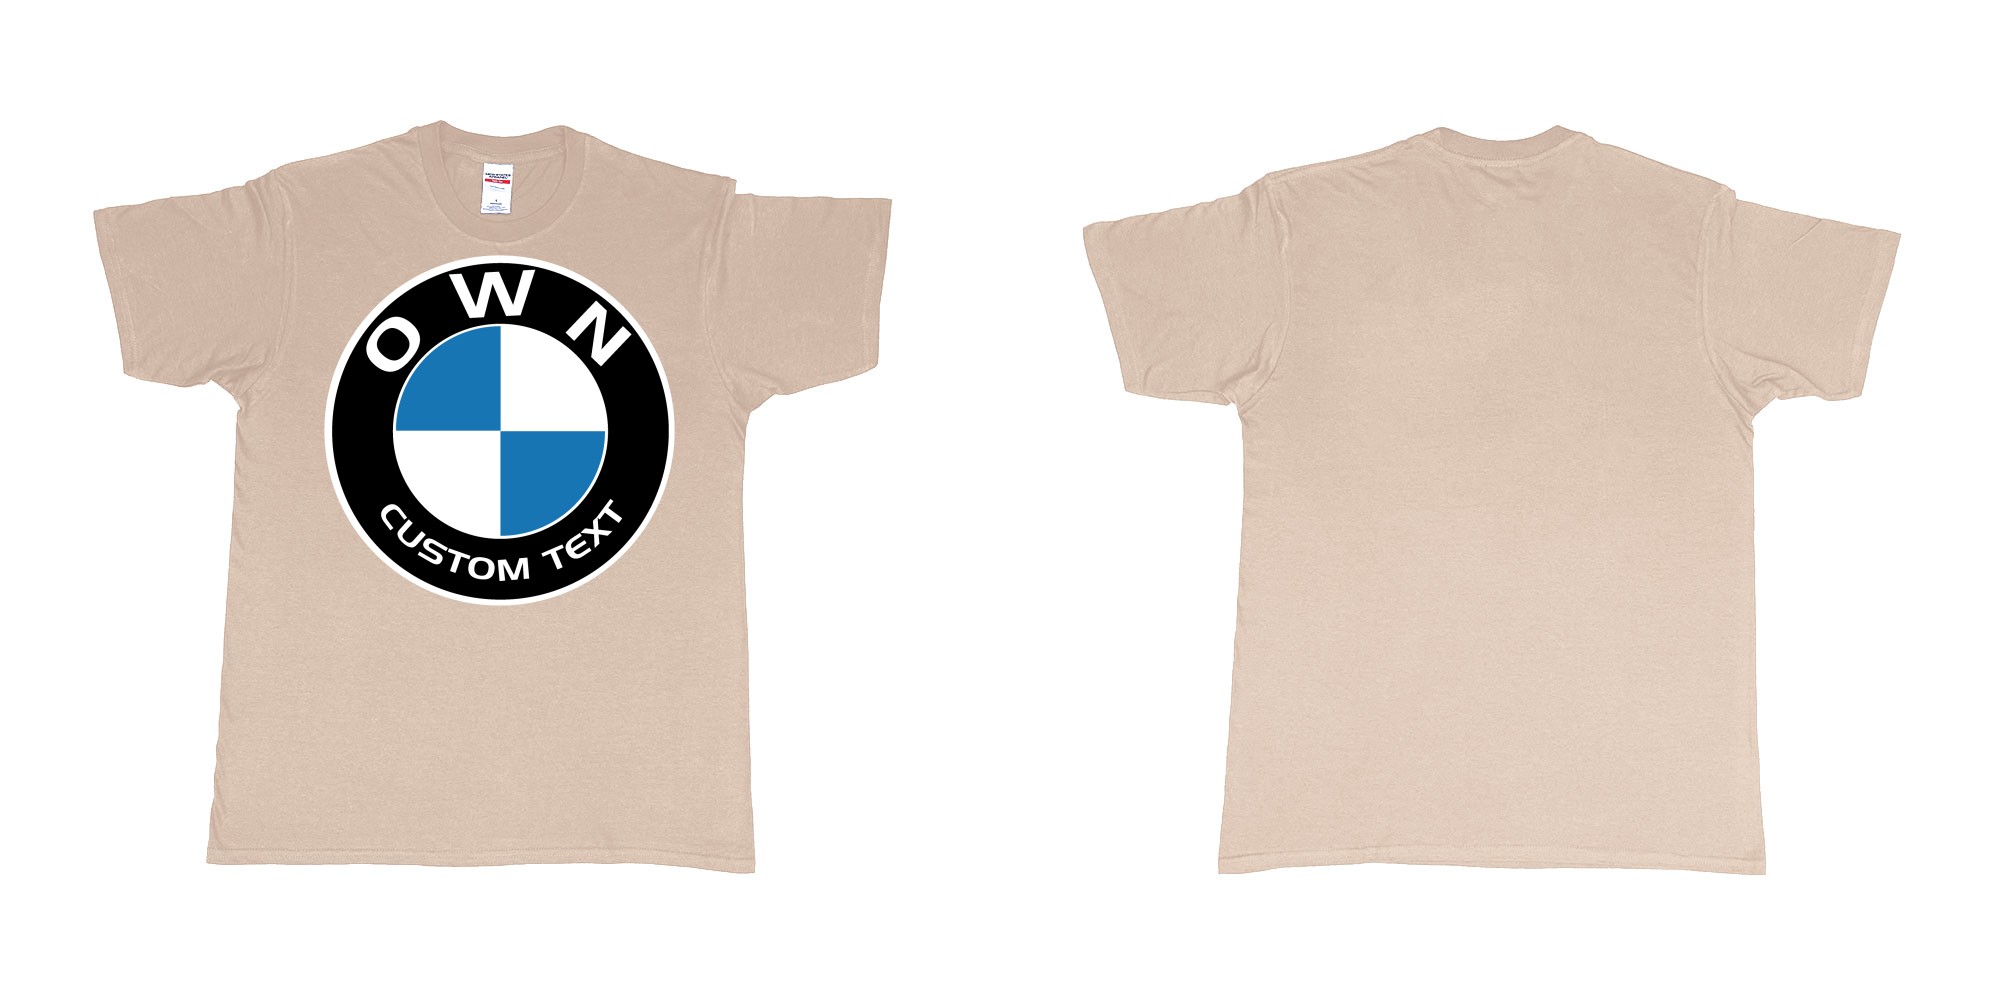 Custom tshirt design BMW logo custom text tshirt printing in fabric color sand choice your own text made in Bali by The Pirate Way